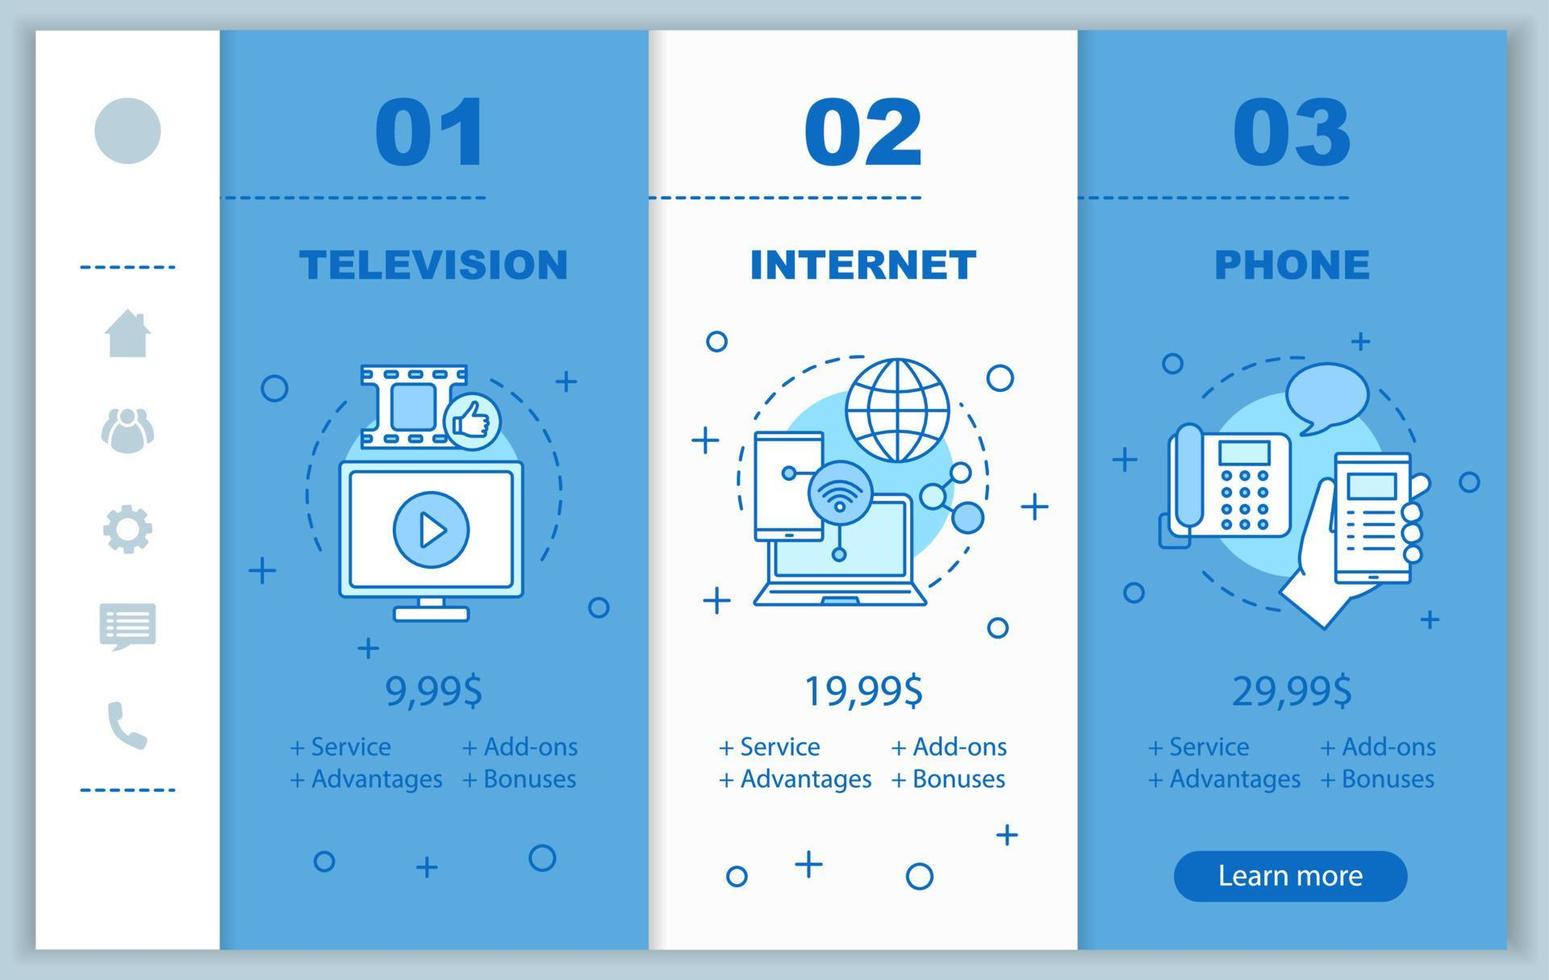 Cable TV, internet, phone bundle onboarding mobile app screens with prices. Walkthrough website pages templates. Communication services providers tariff plans steps. Smartphone payment web page layout vector